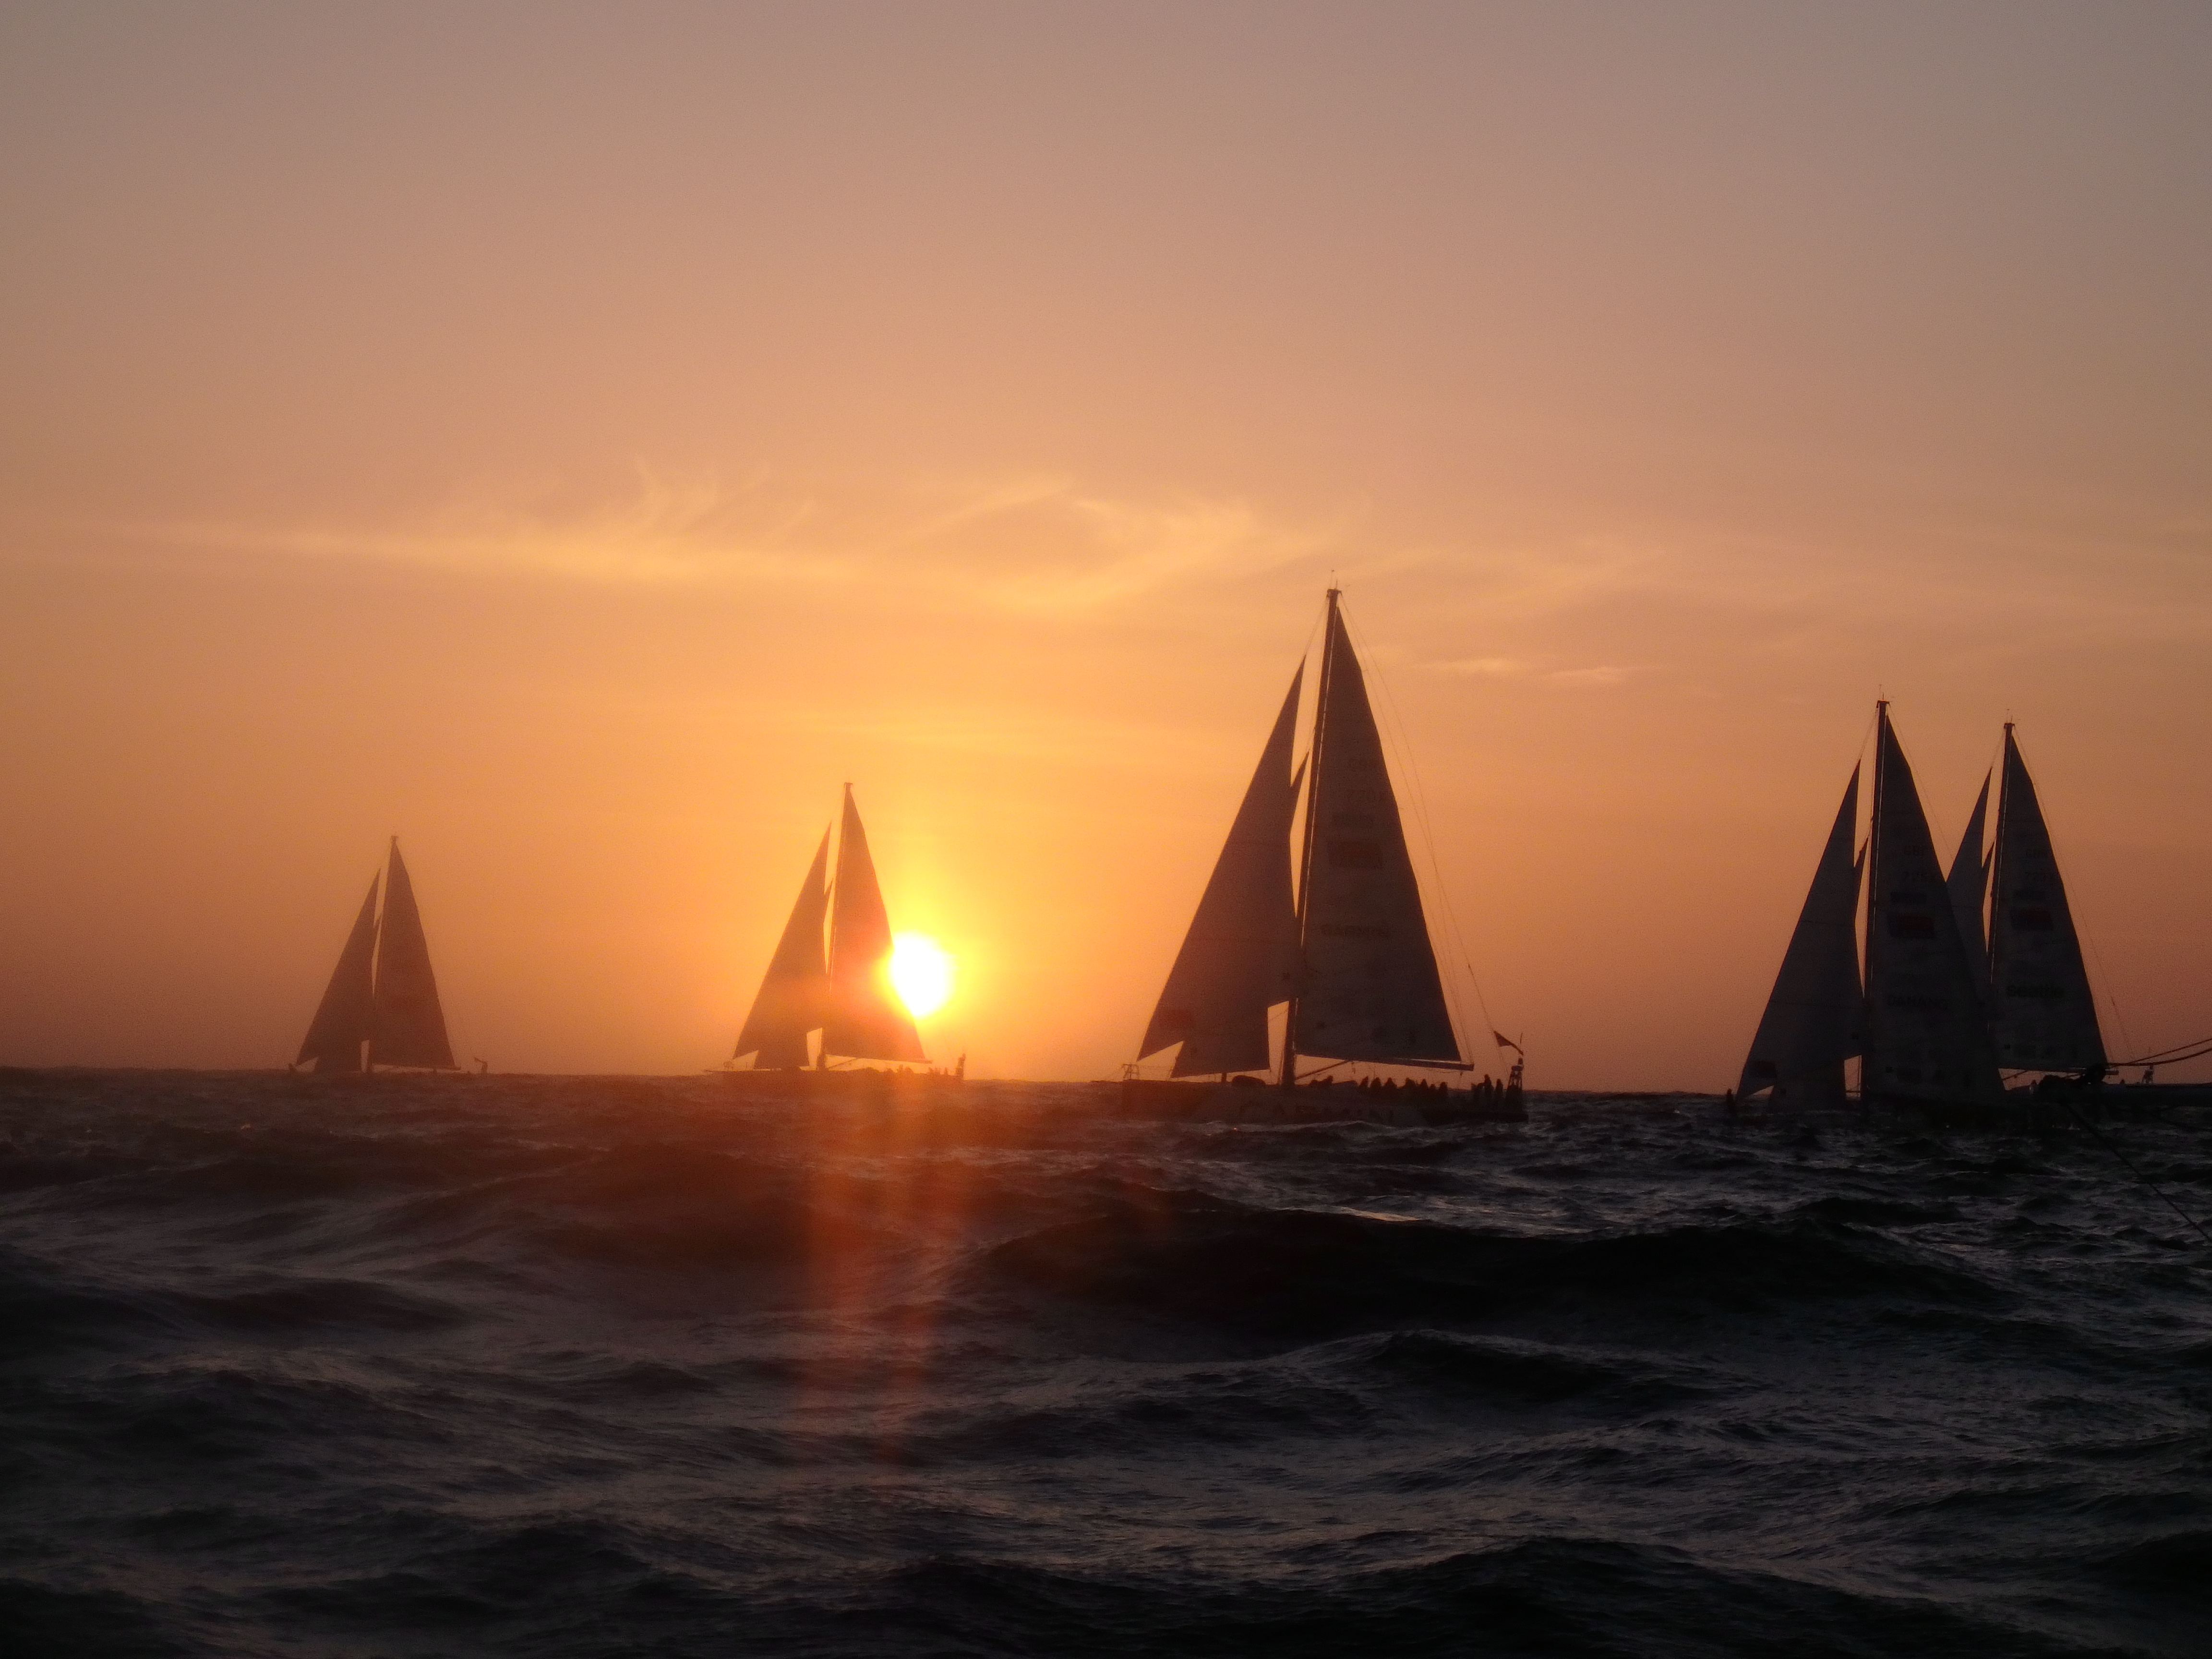 RACE 10 DAY 3: GYBE BALLET CONTINUES AS WIND EASES